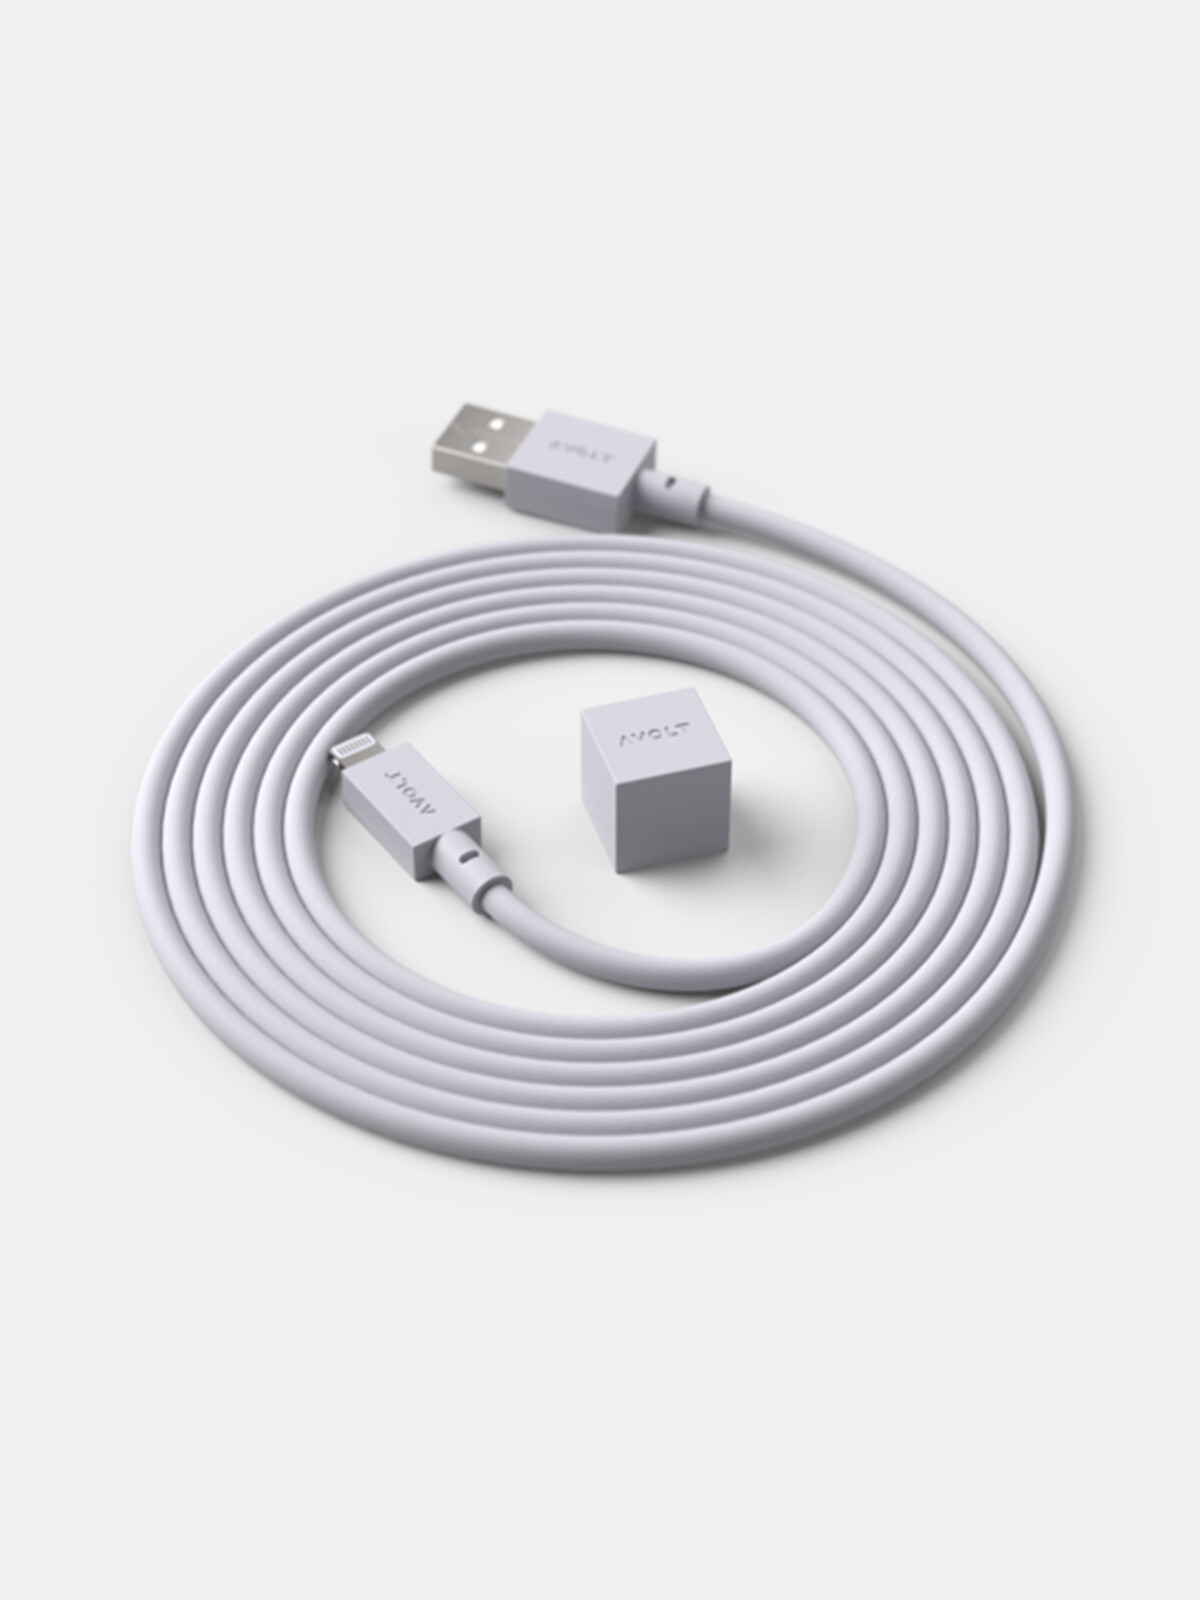 Cable 1 usb a to lightning, 1. GRIS